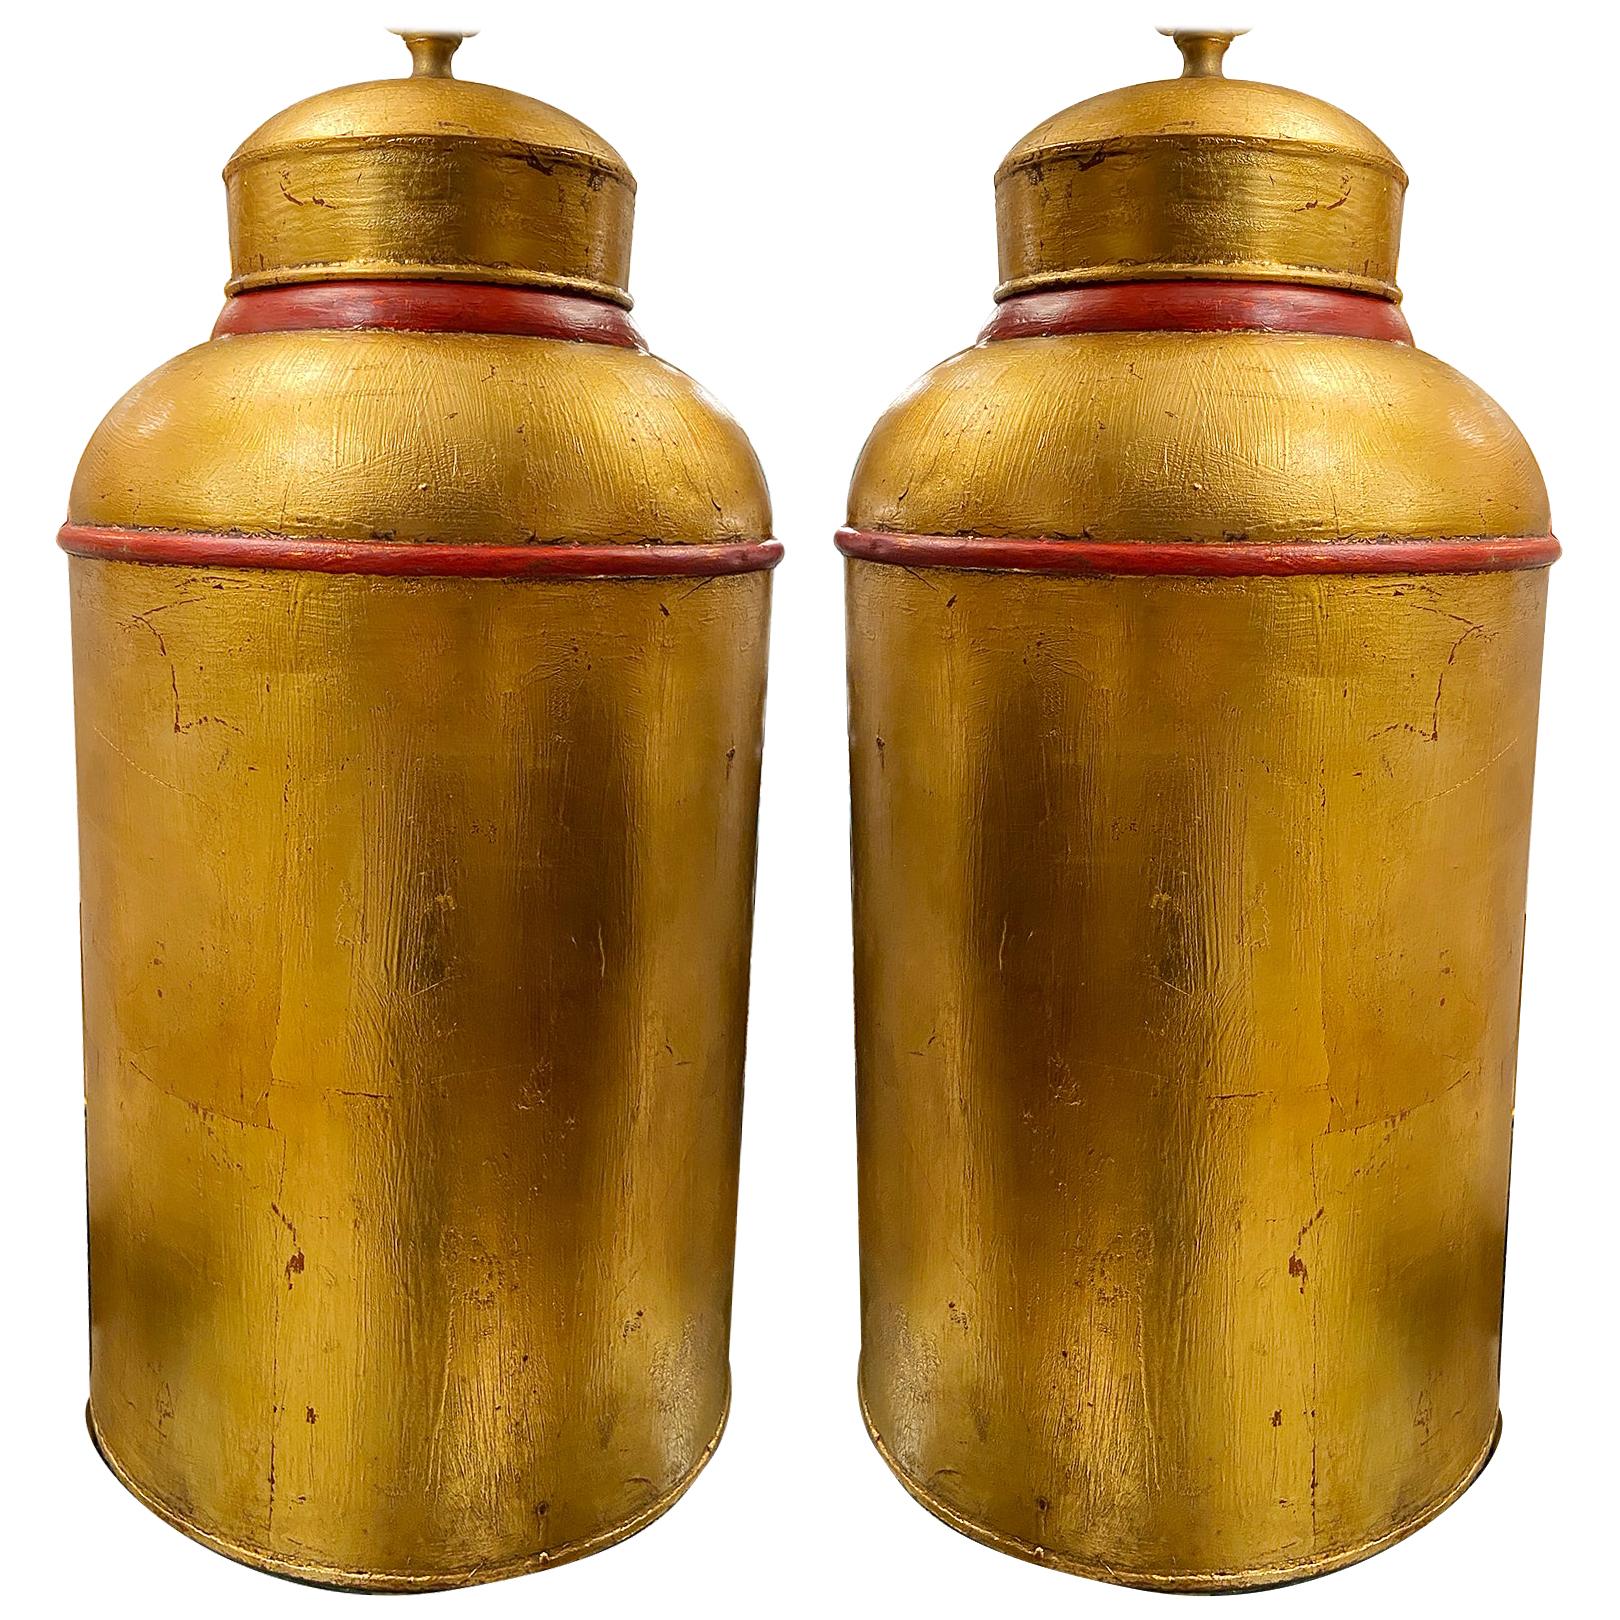 Gilt Tea Canister Lamps with Red Details